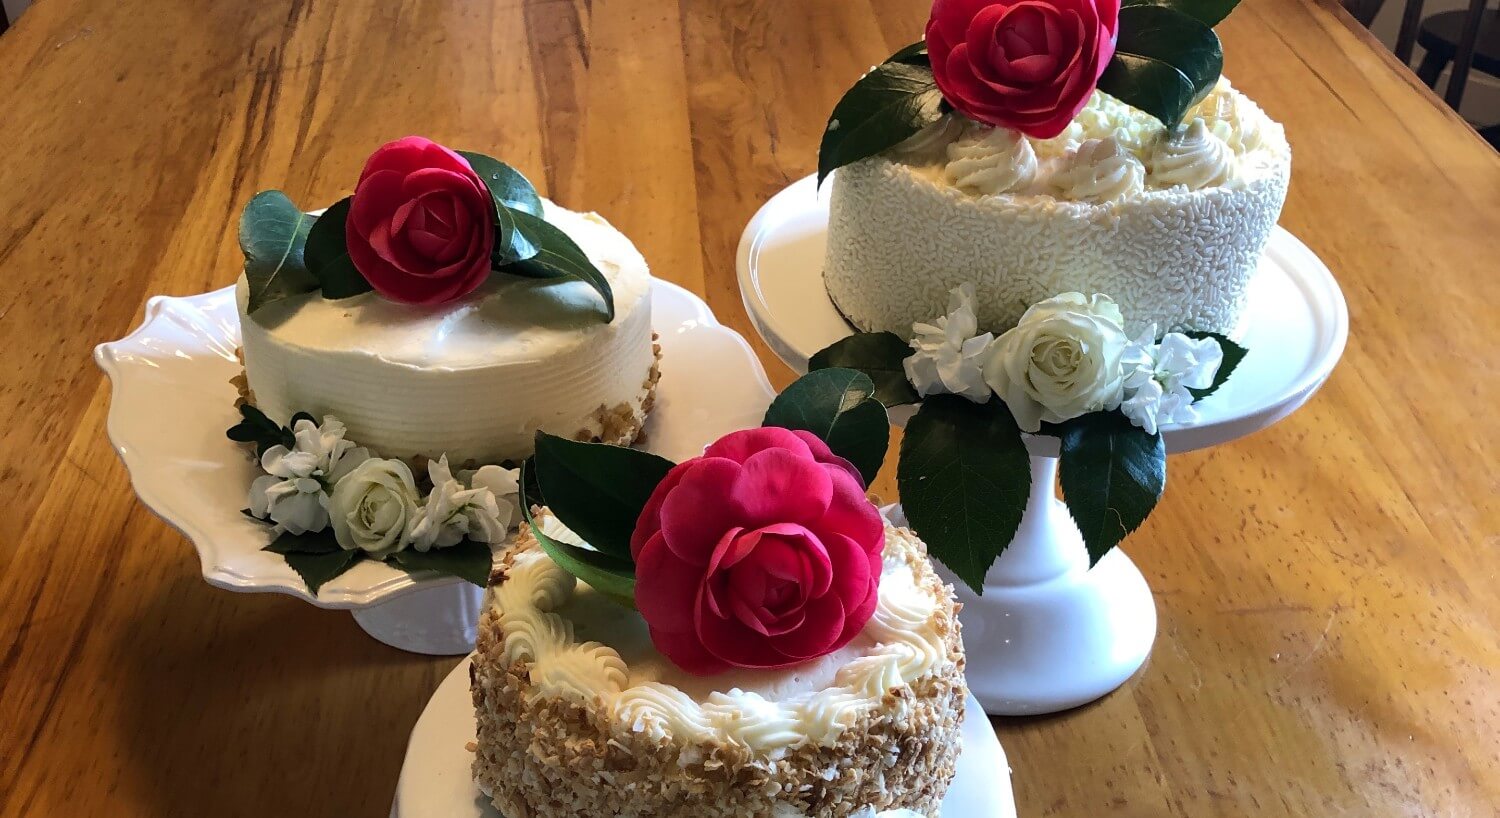 Three small white cakes on white stands decorated with red and white flowers and green leaves